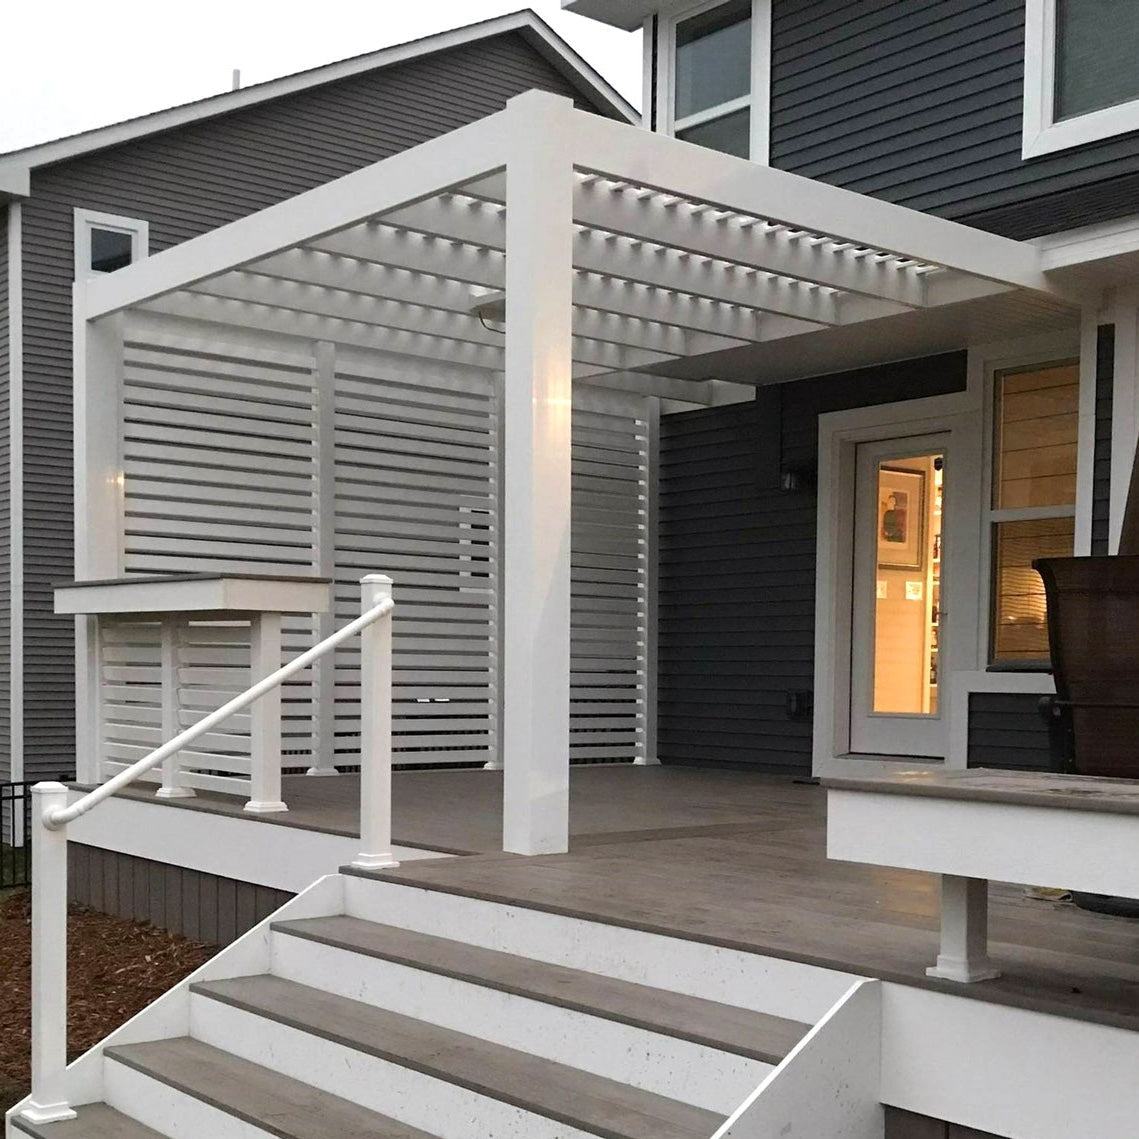 Picture of a 2-post white vinyl wall-mounted contemporary pergola covering the back deck of a dark-colored house